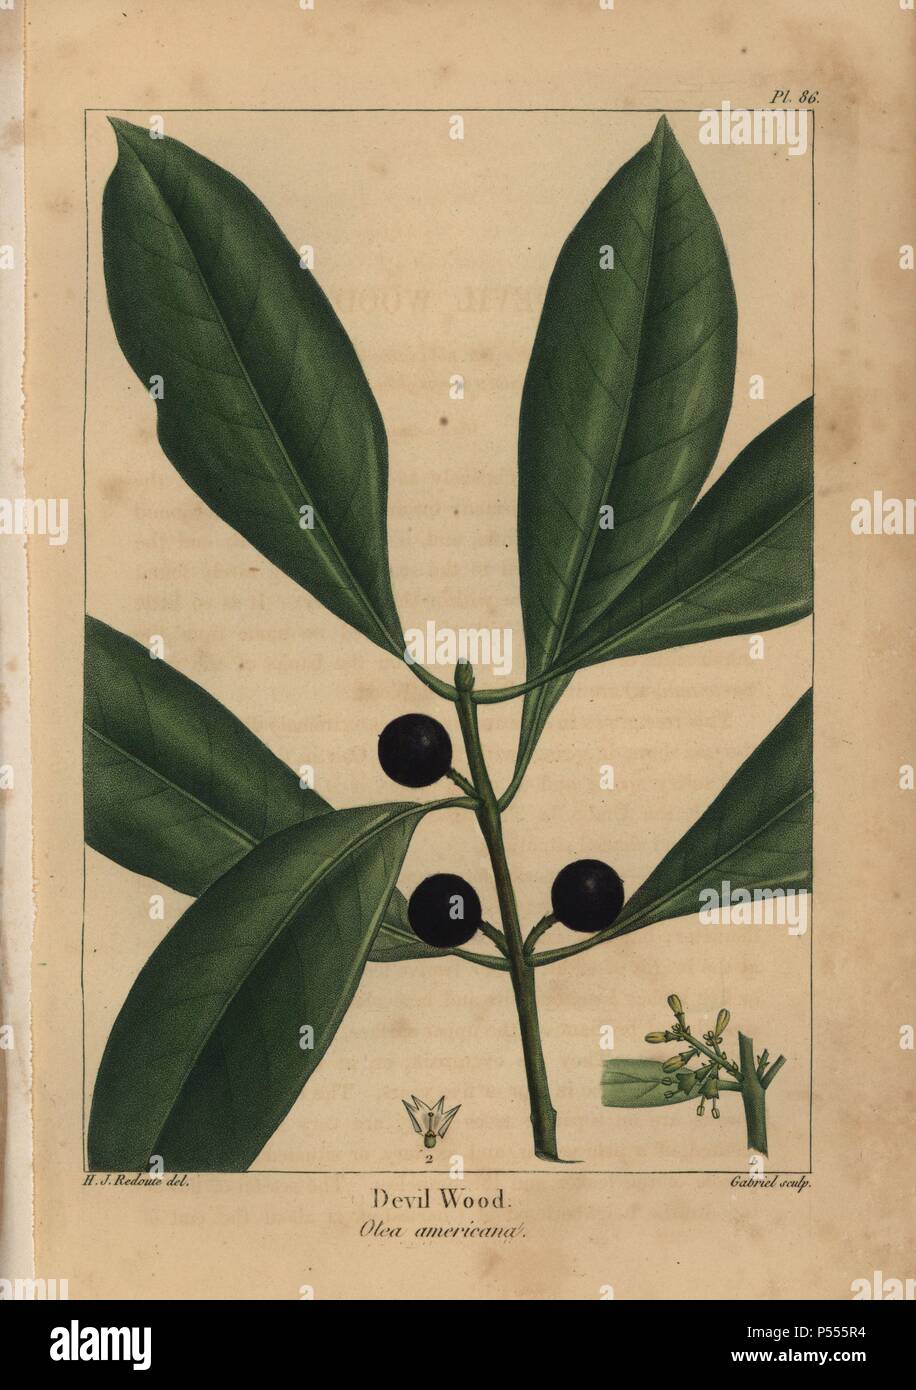 Leaves, fruit and flowers of the Devil wood or devilwood tree, Osmanthus americanus, Olea americana. Handcolored stipple engraving from a botanical illustration by Henri Joseph Redoute, engraved on copper by Gabriel, from Francois Andre Michaux's 'North American Sylva,' Philadelphia, 1857. French botanist Michaux (1770-1855) explored America and Canada in 1785 cataloging its native trees. Stock Photo